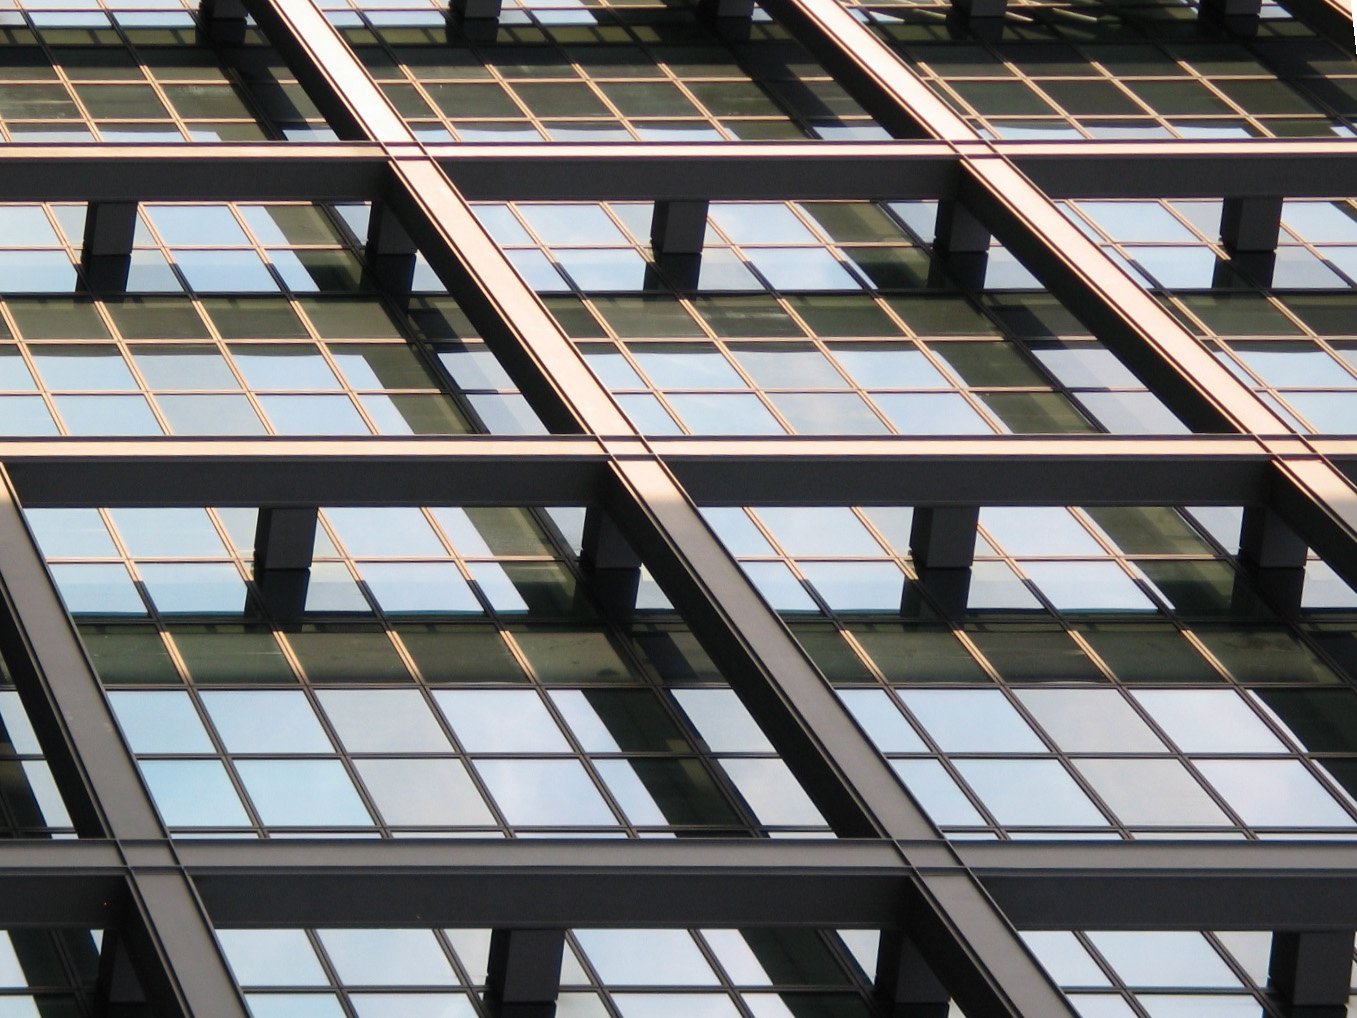 an image of a glass building in an urban setting